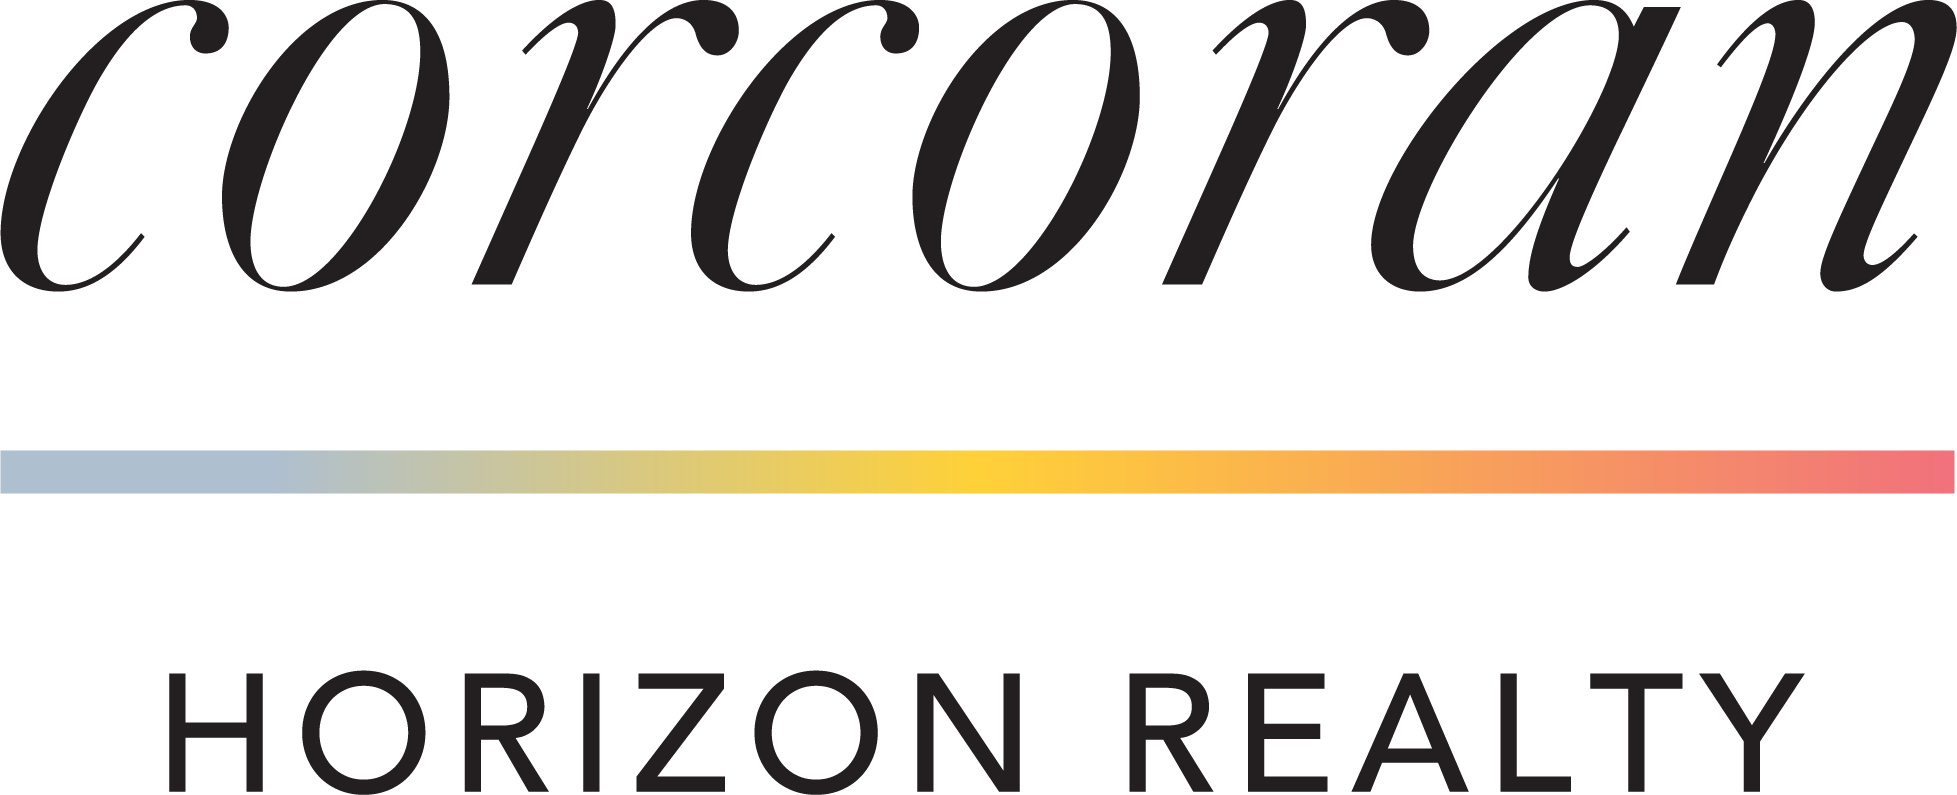 Building presented by Corcoran Horizon Realty